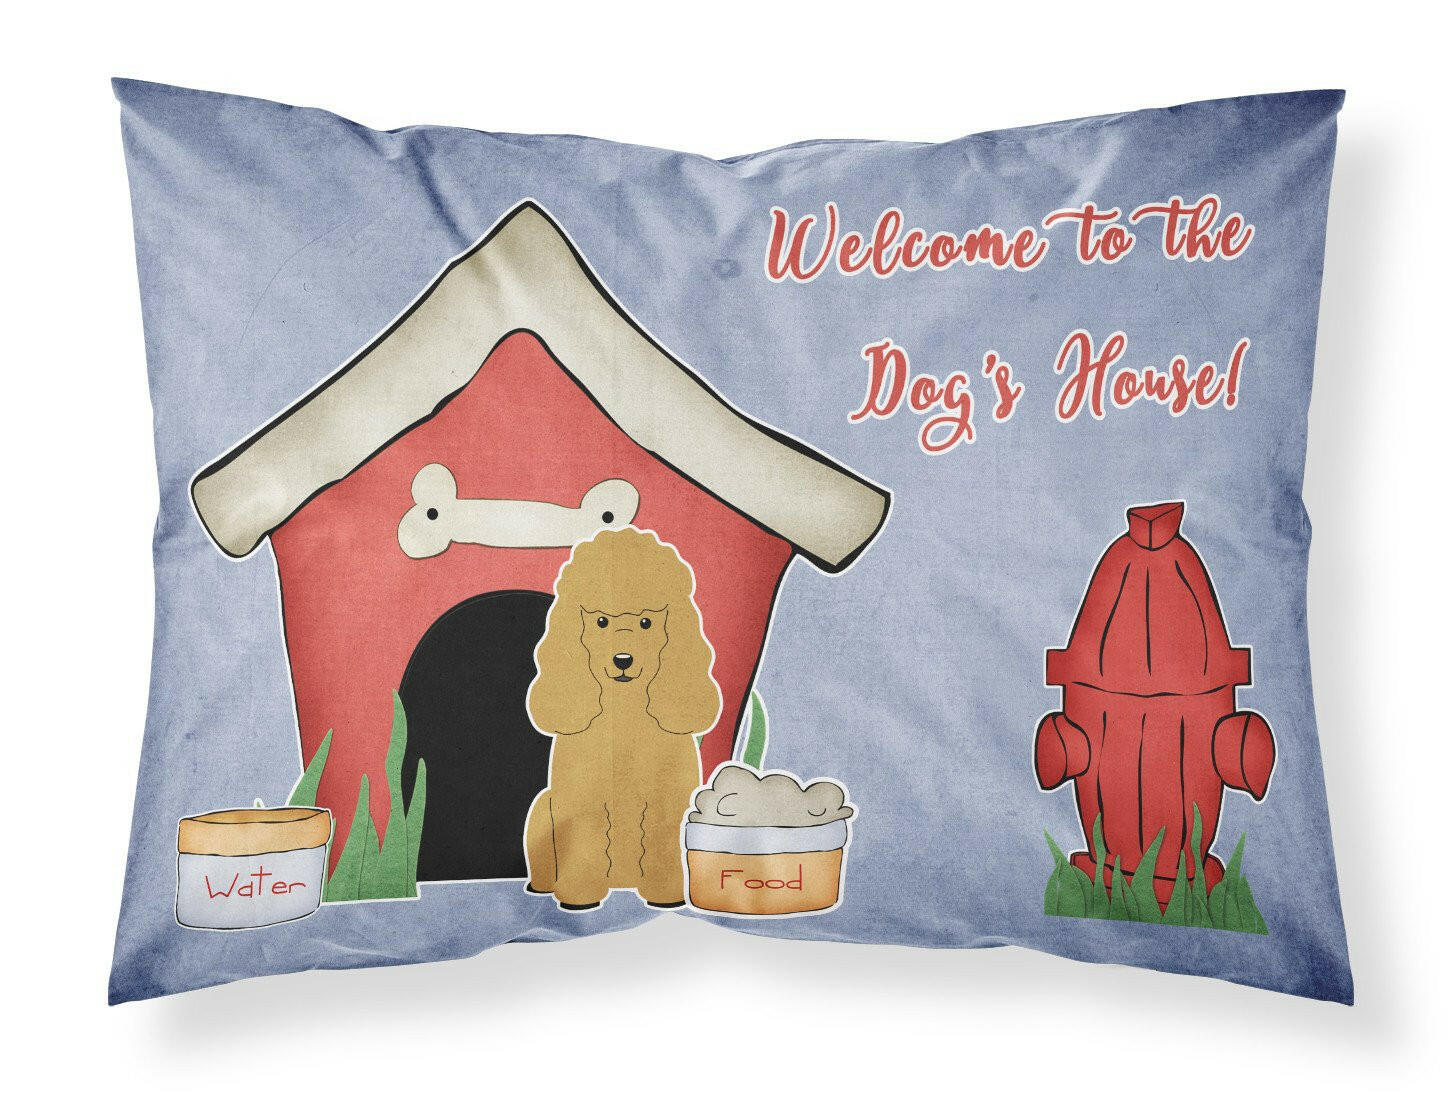 Dog House Collection Poodle Tan Fabric Standard Pillowcase BB2823PILLOWCASE by Caroline's Treasures